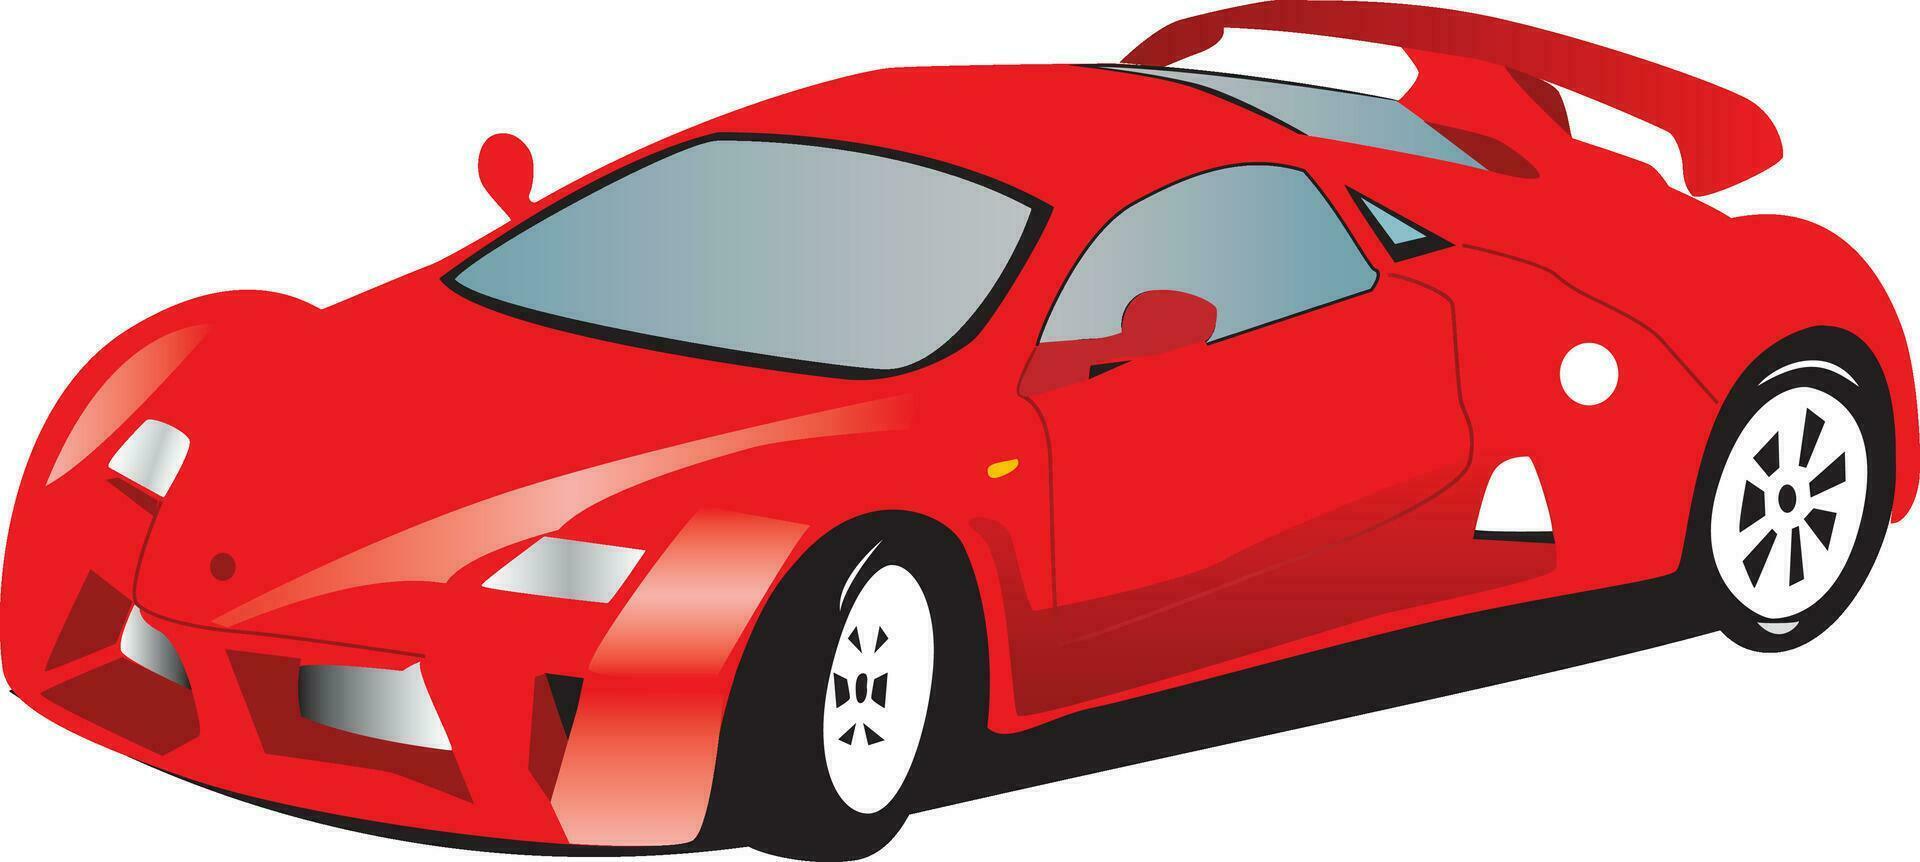 Red sports car vector